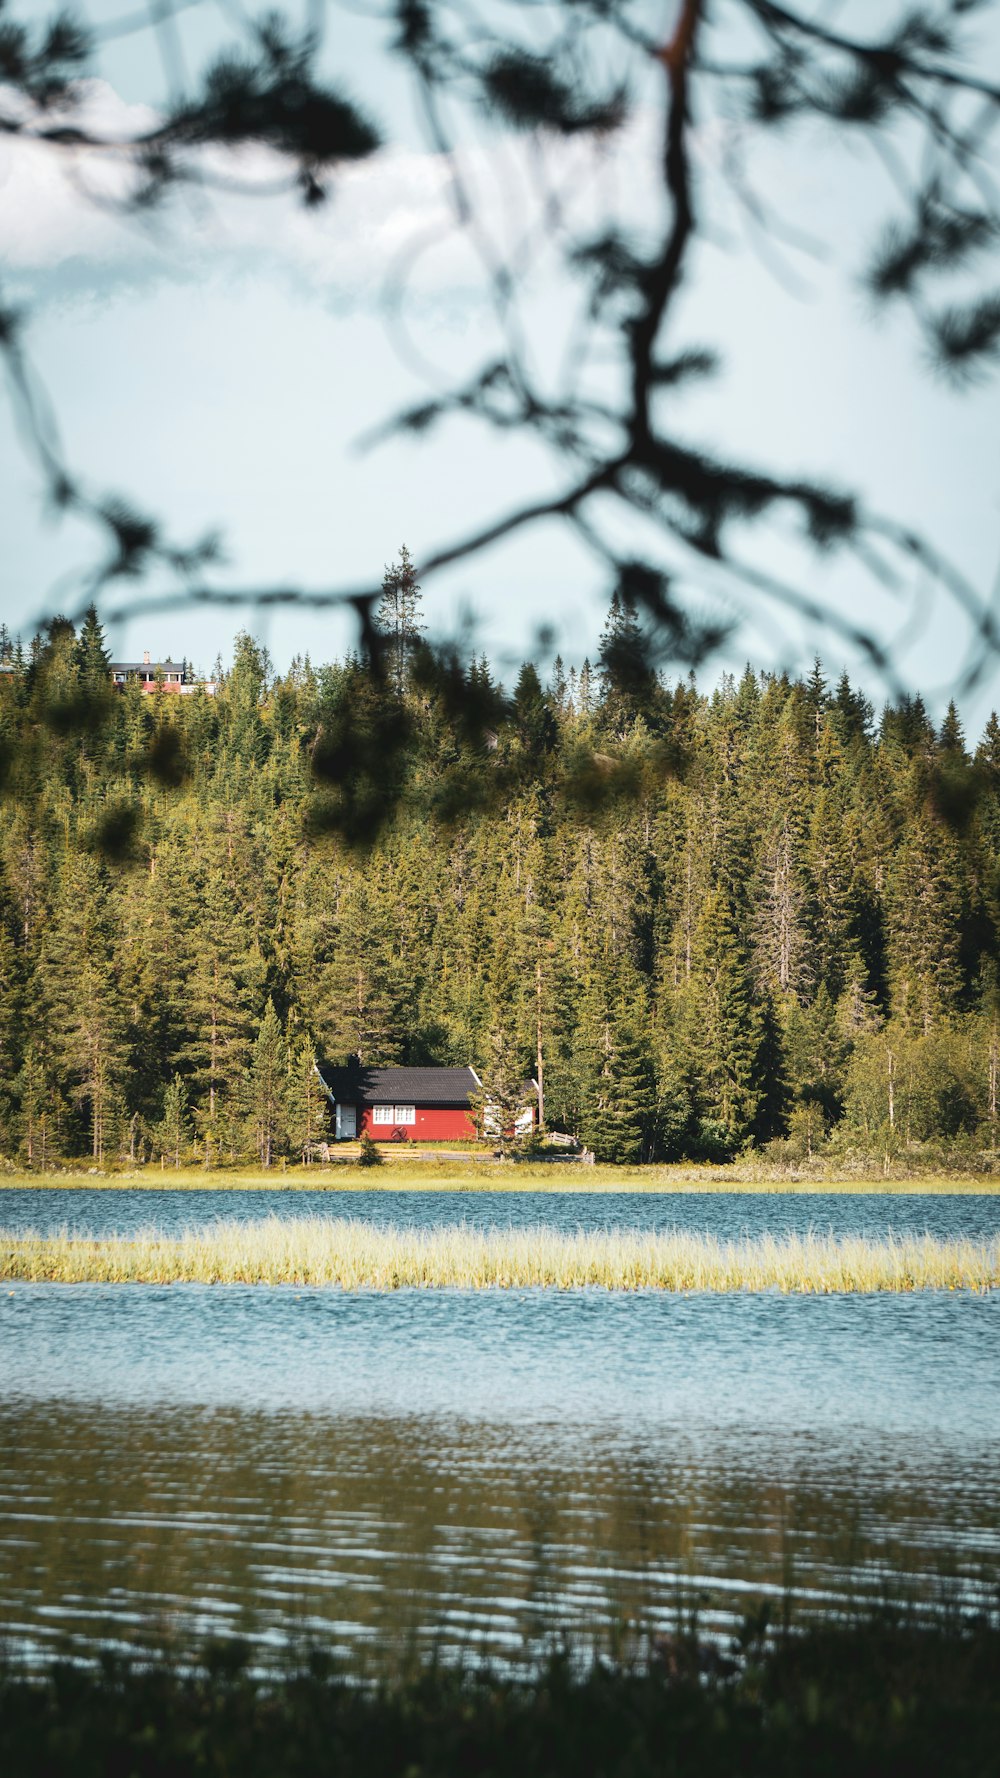 a house in the middle of a lake surrounded by trees